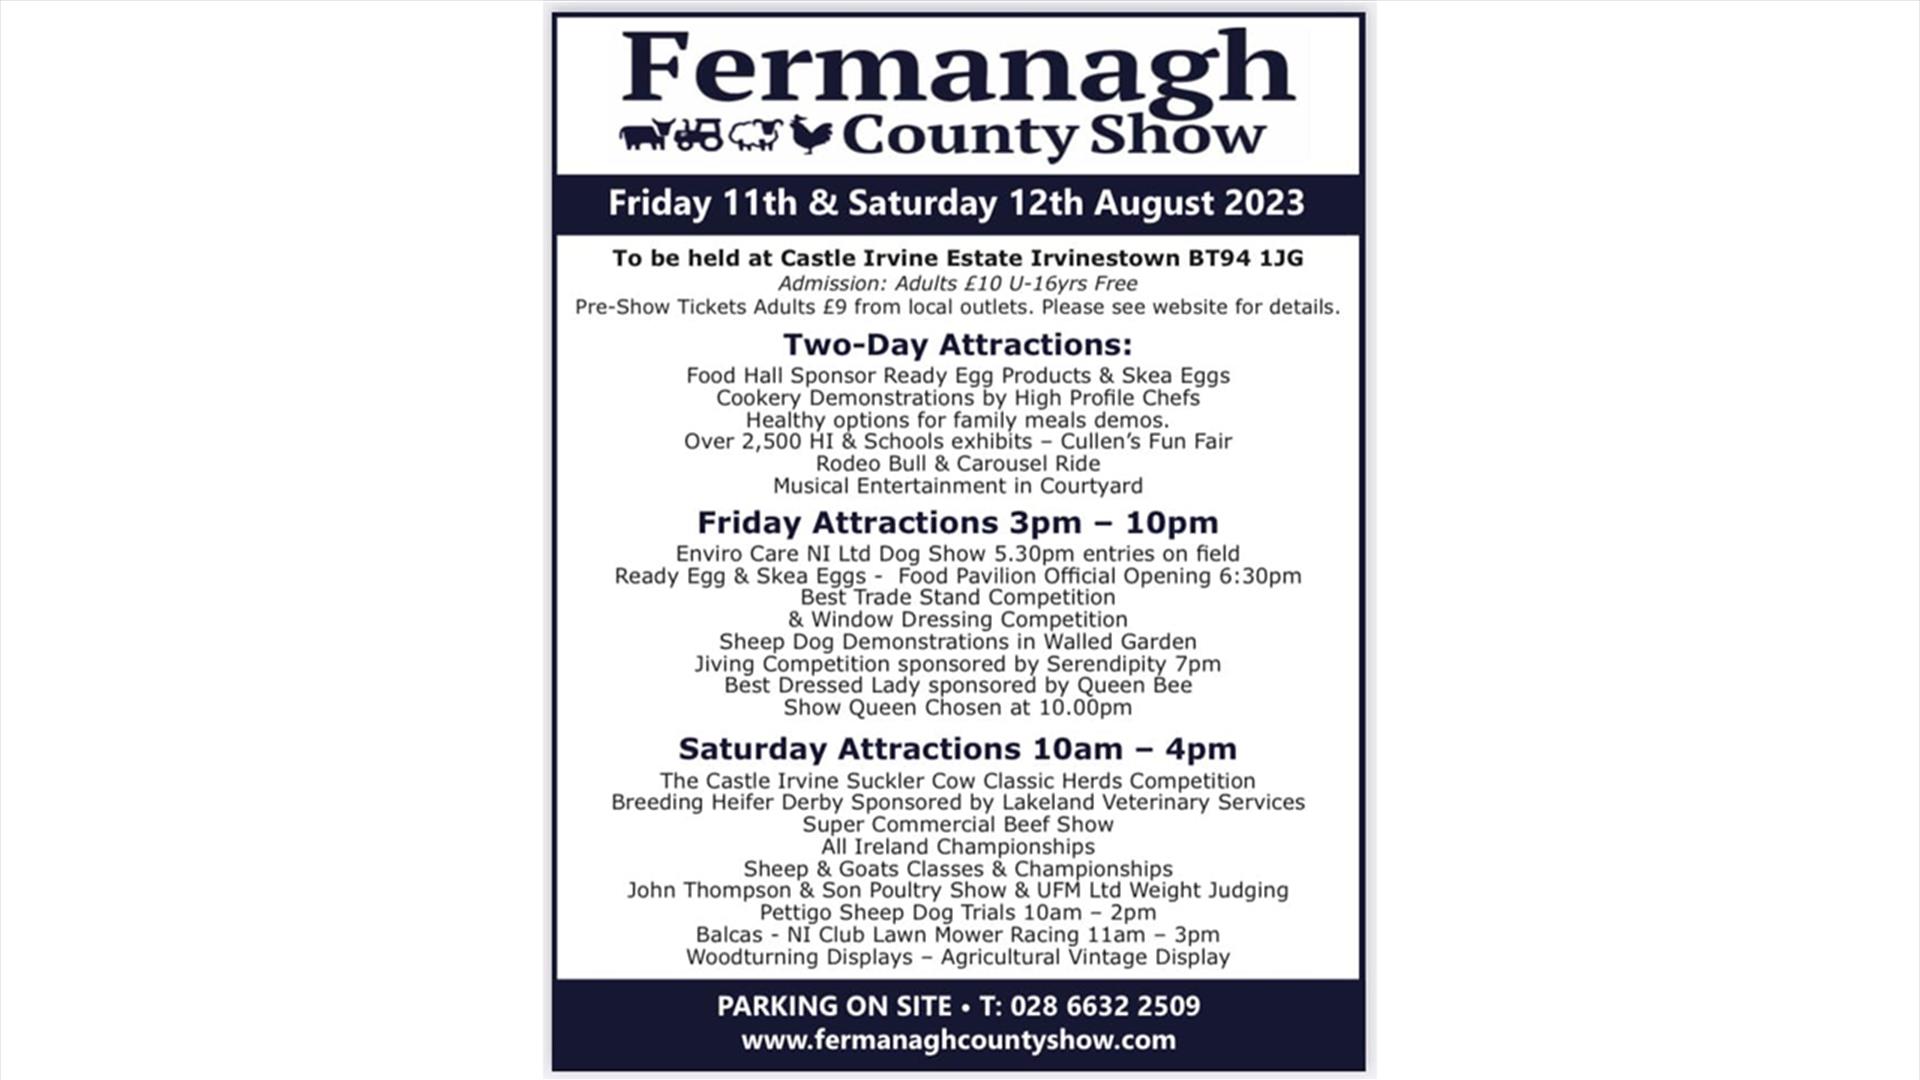 Fermanagh County Show  - Castle Irvine 11th & 12th August 2023